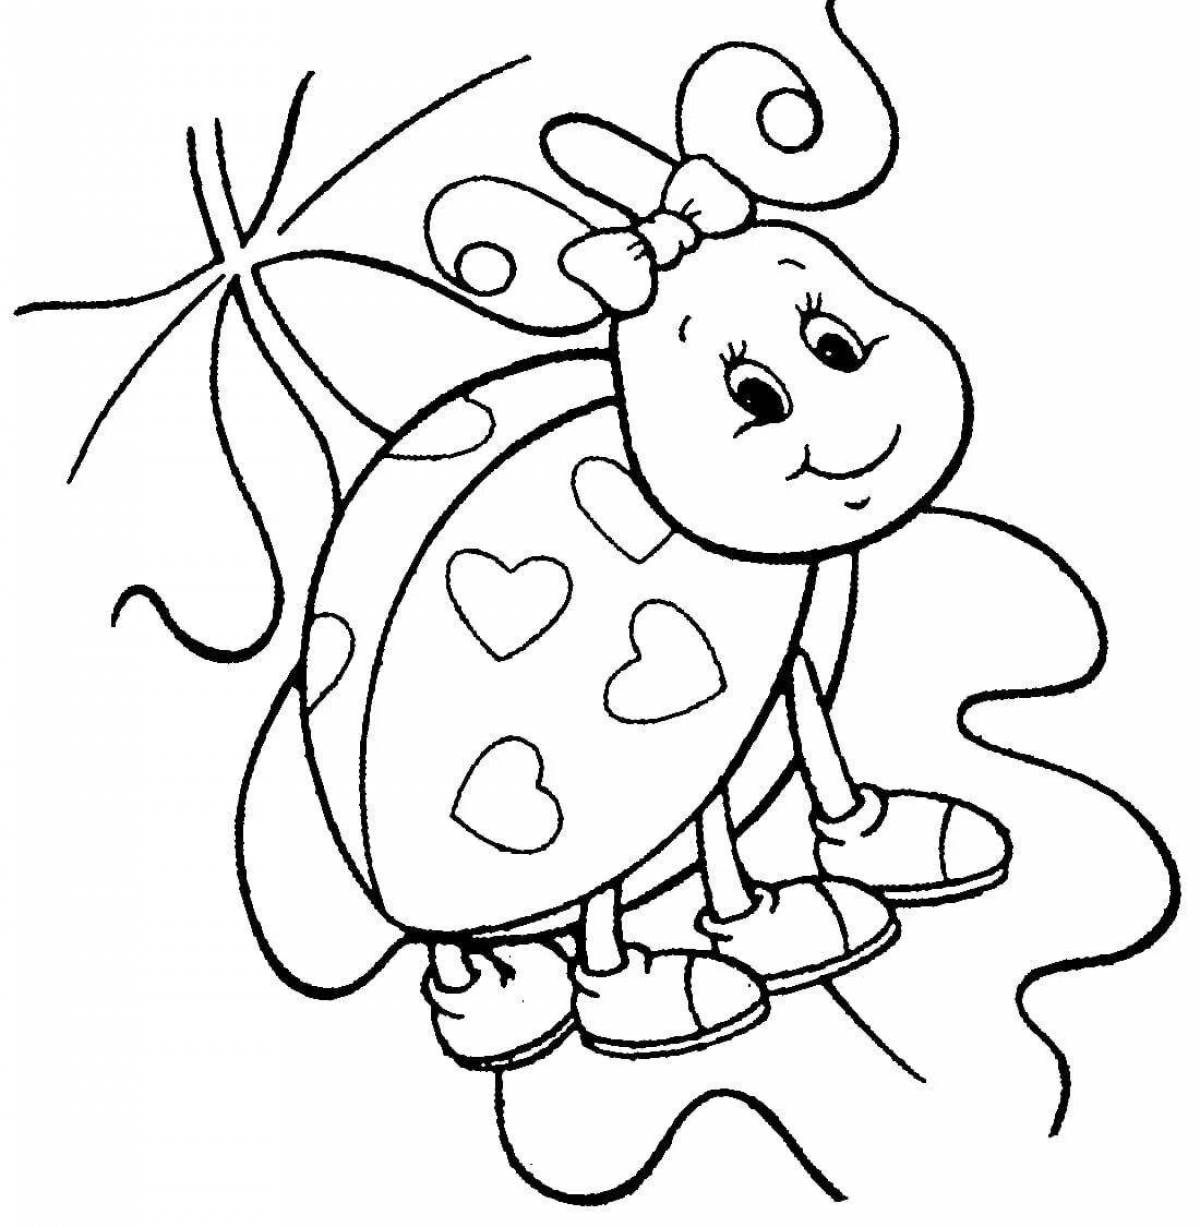 Cute insects coloring book for 4-5 year olds